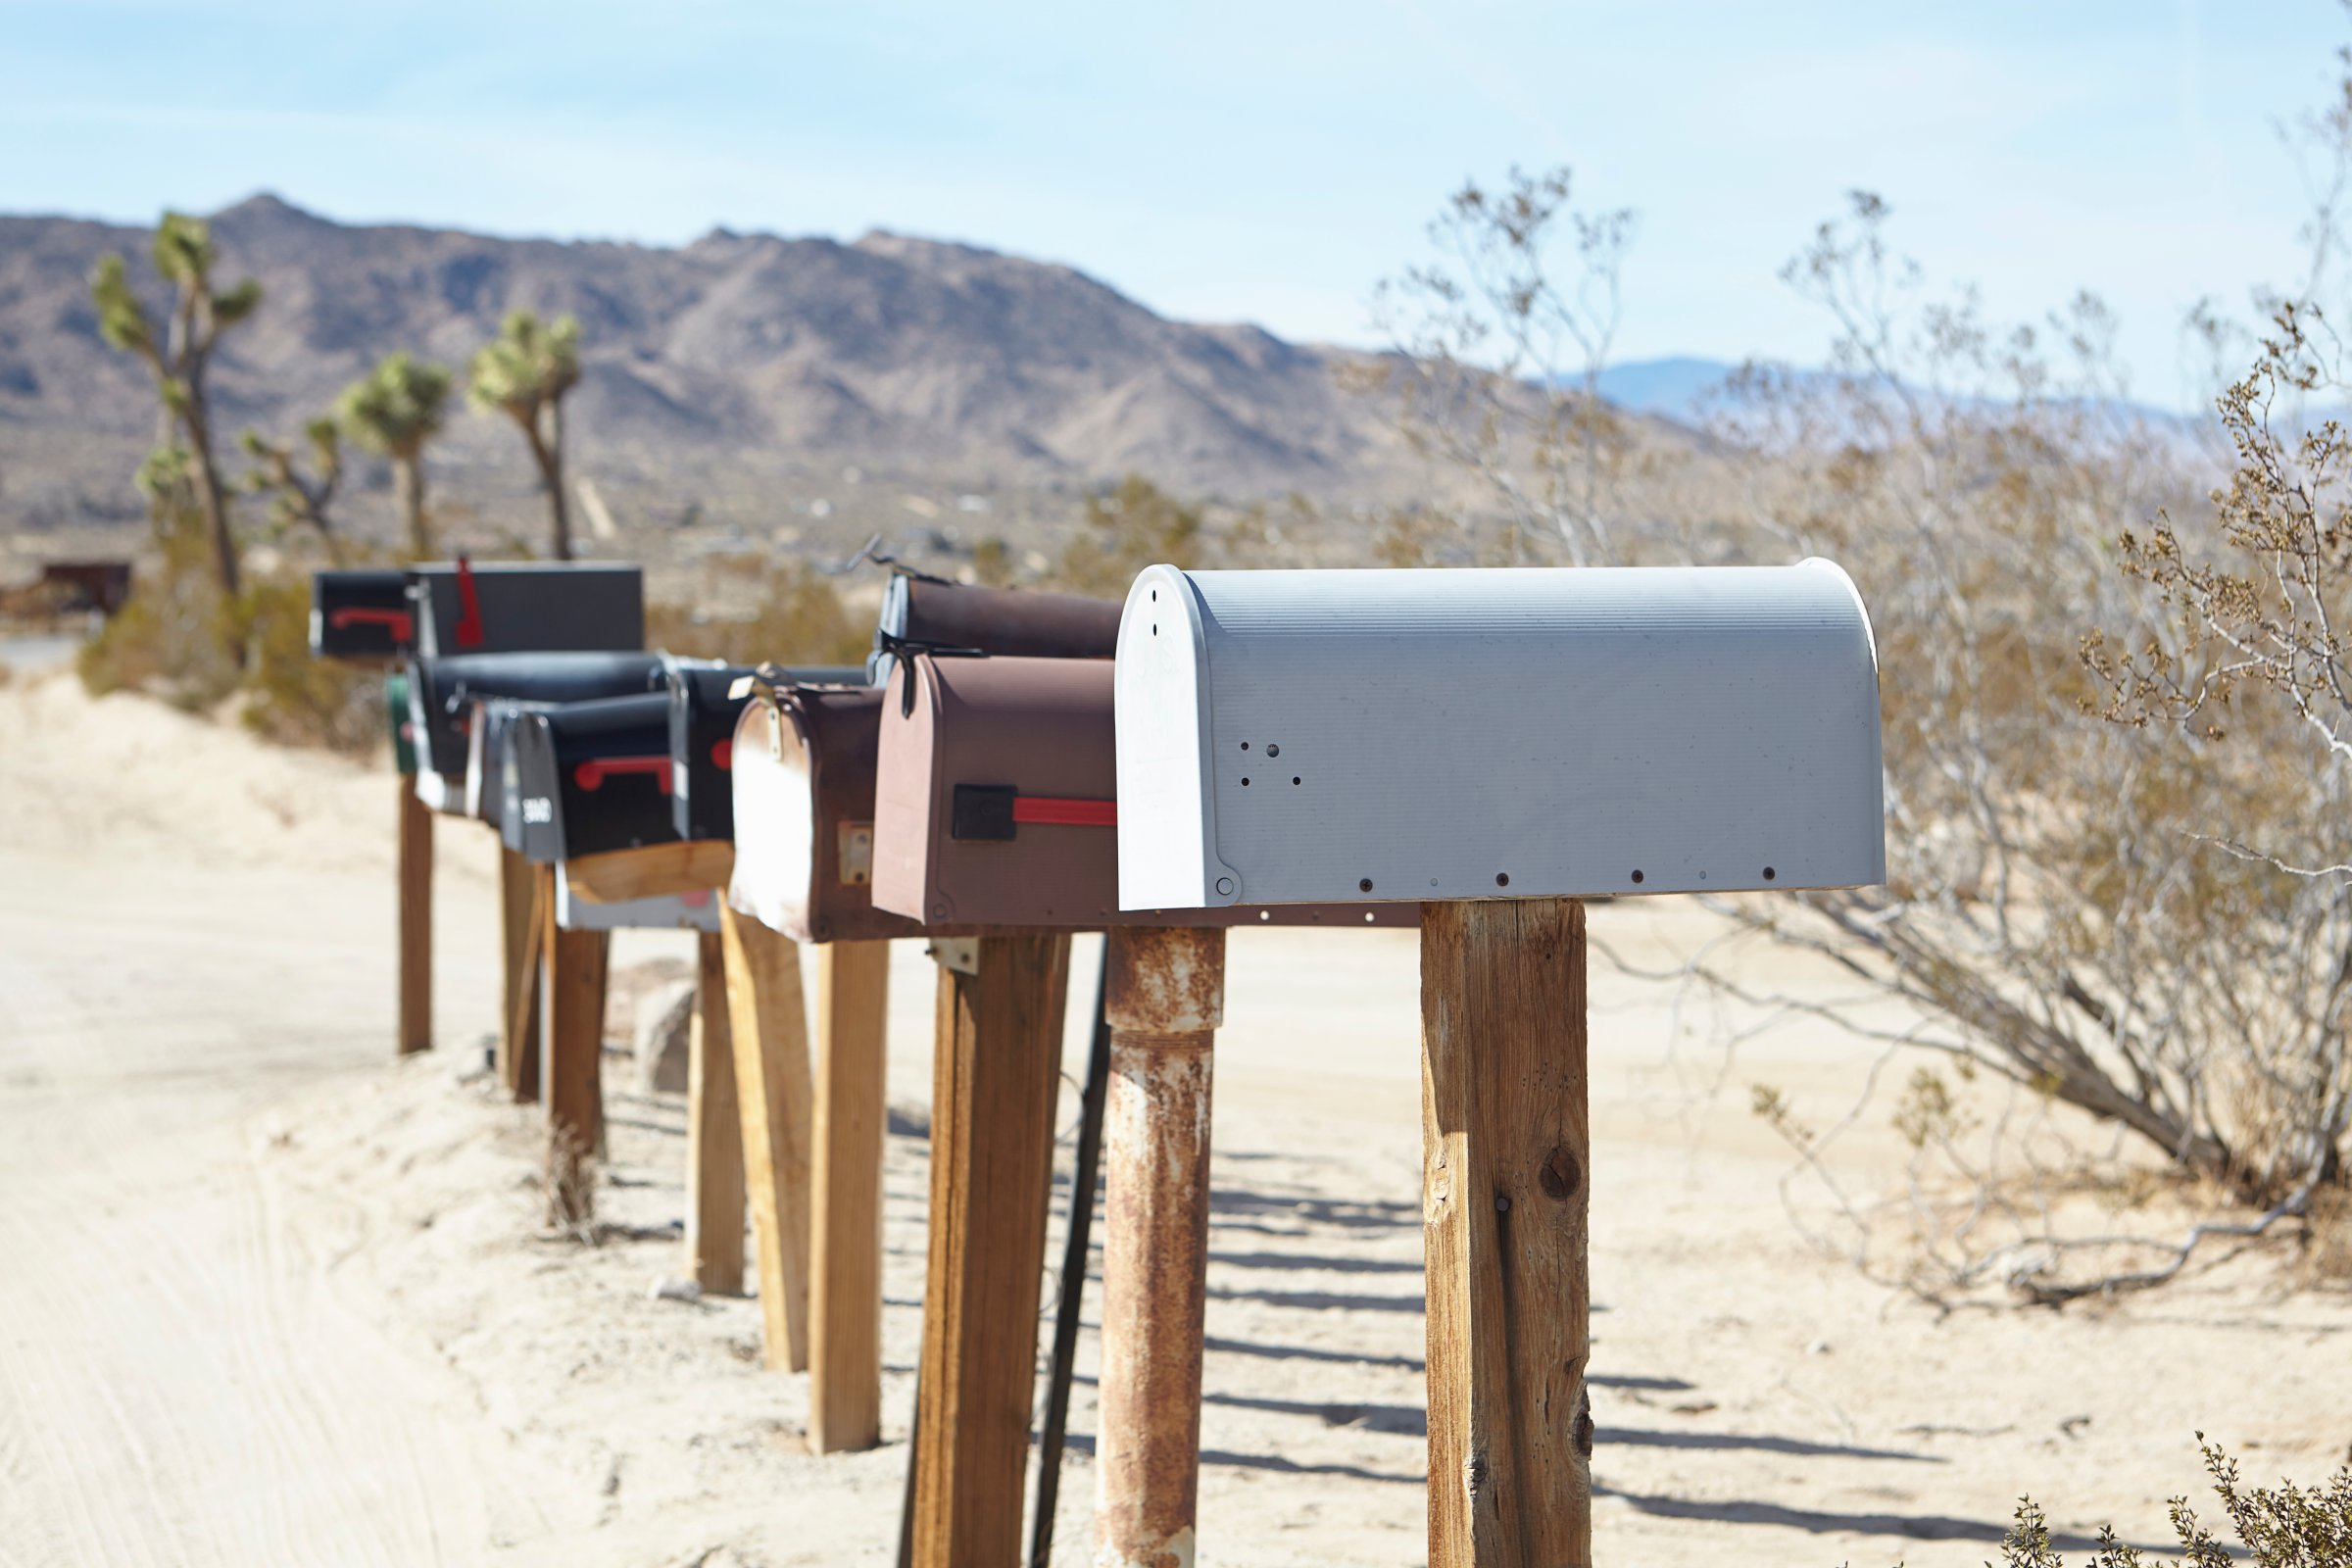 Mailboxes in dry rural landscape